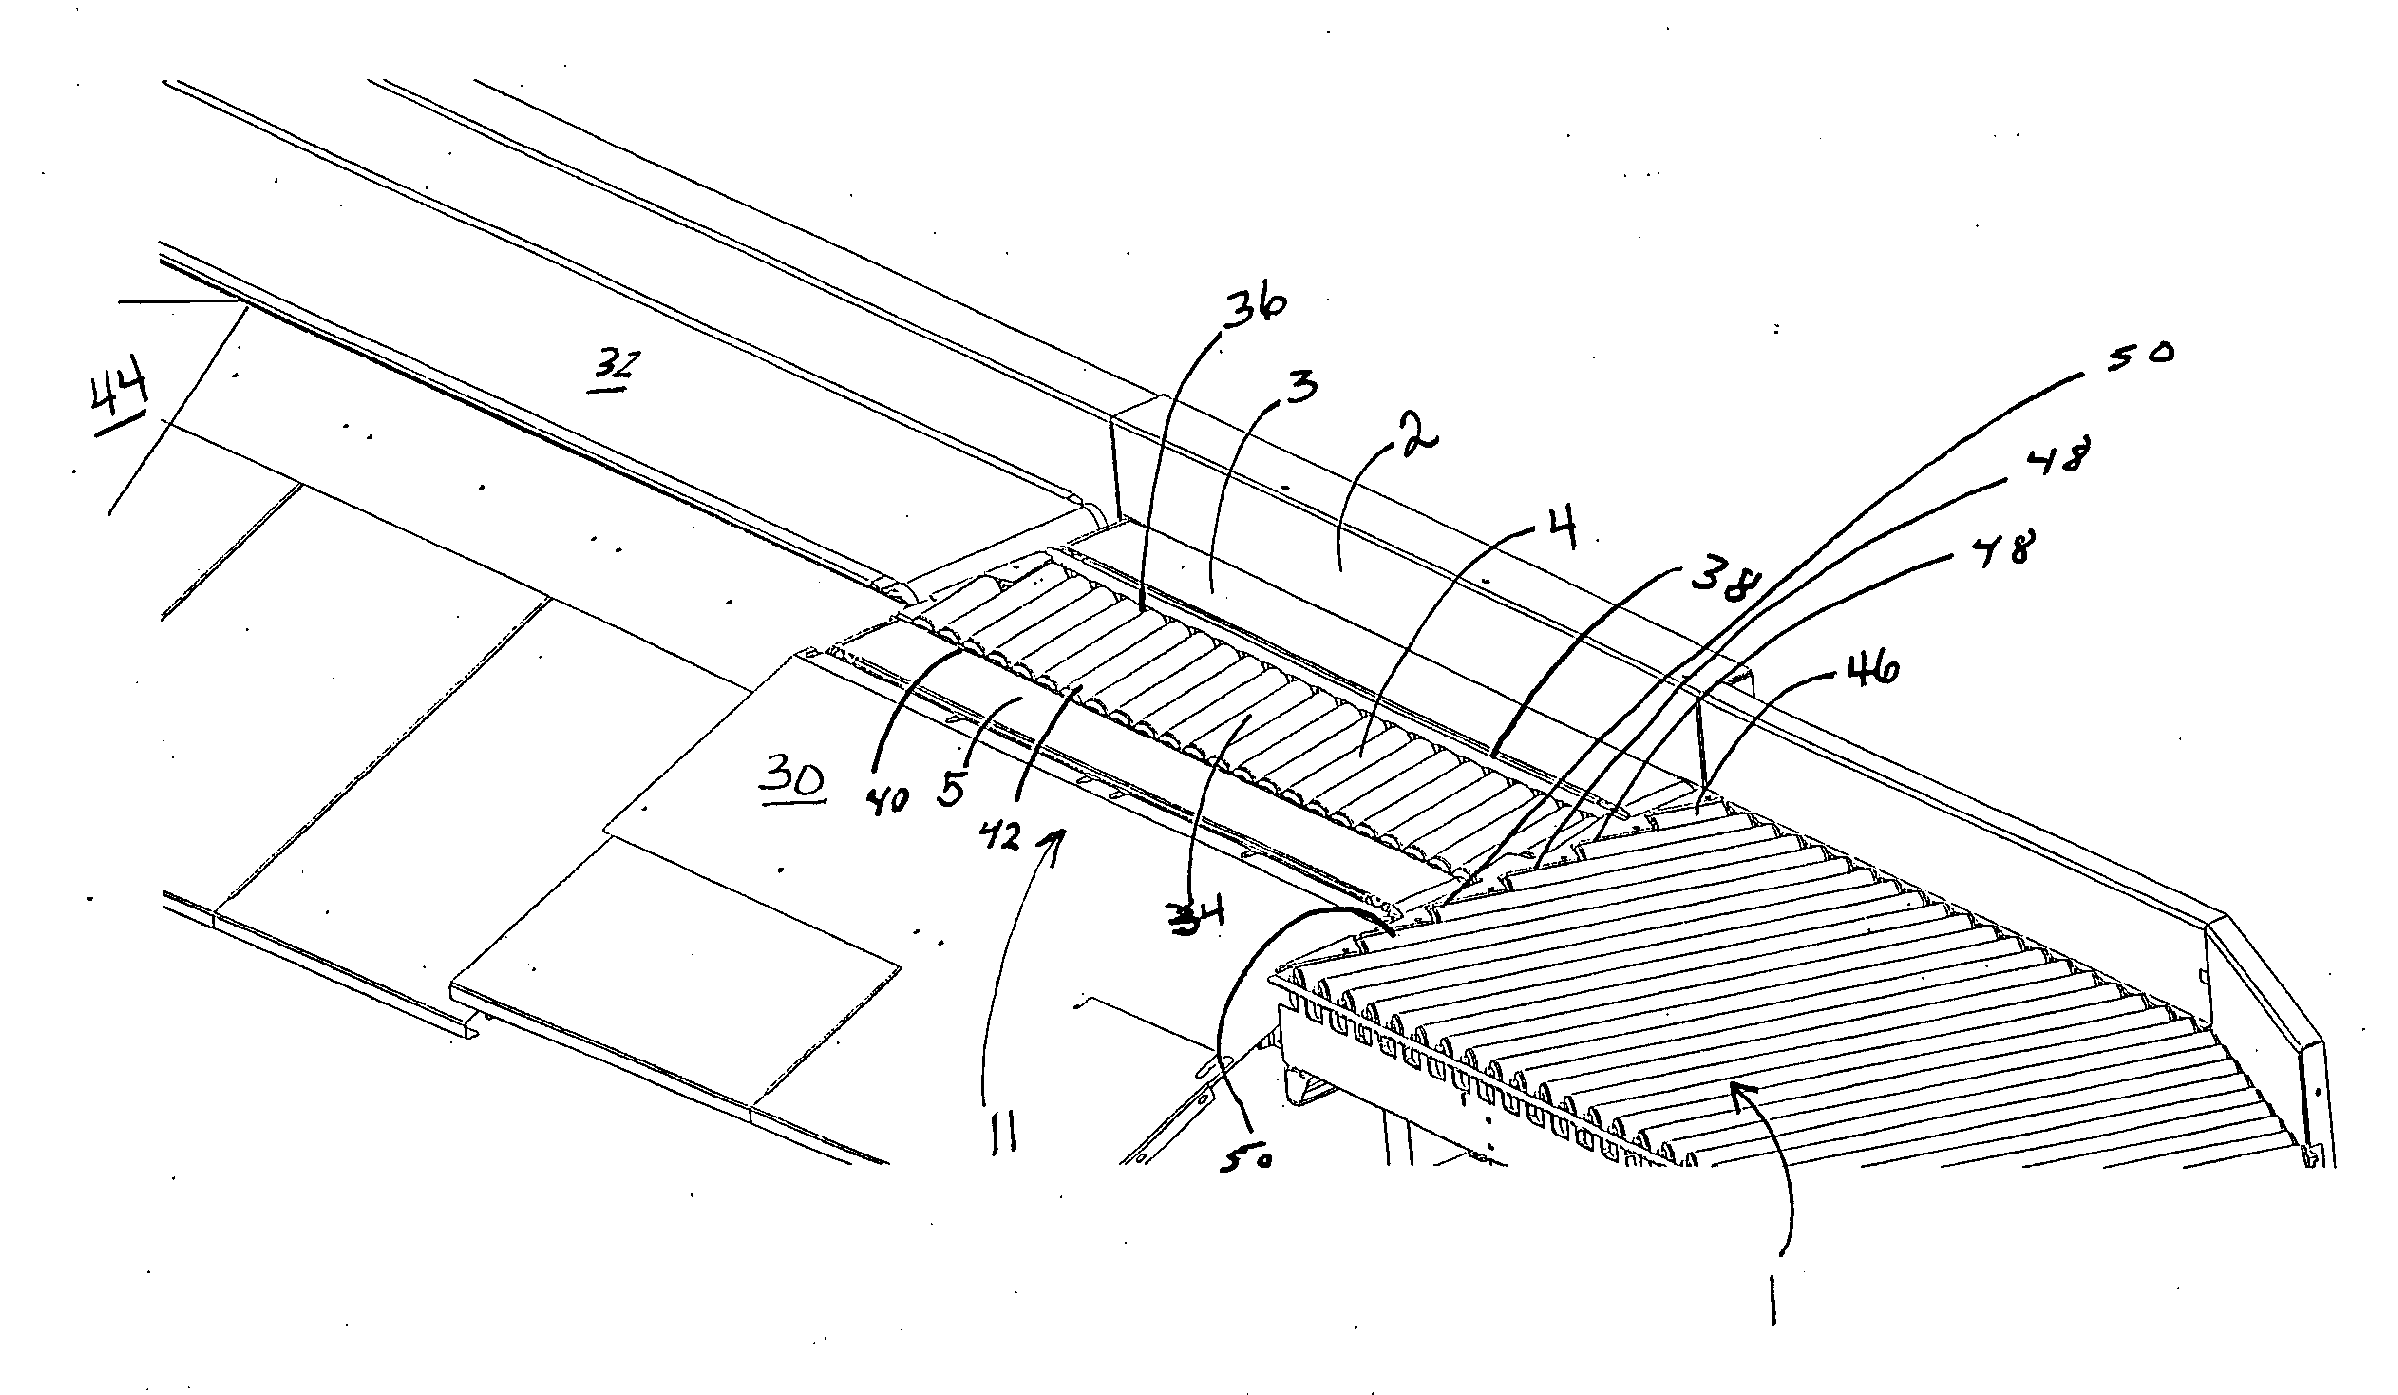 Singulator Conveyor System for Rigid Parcel and Large Bags of Small Parcels